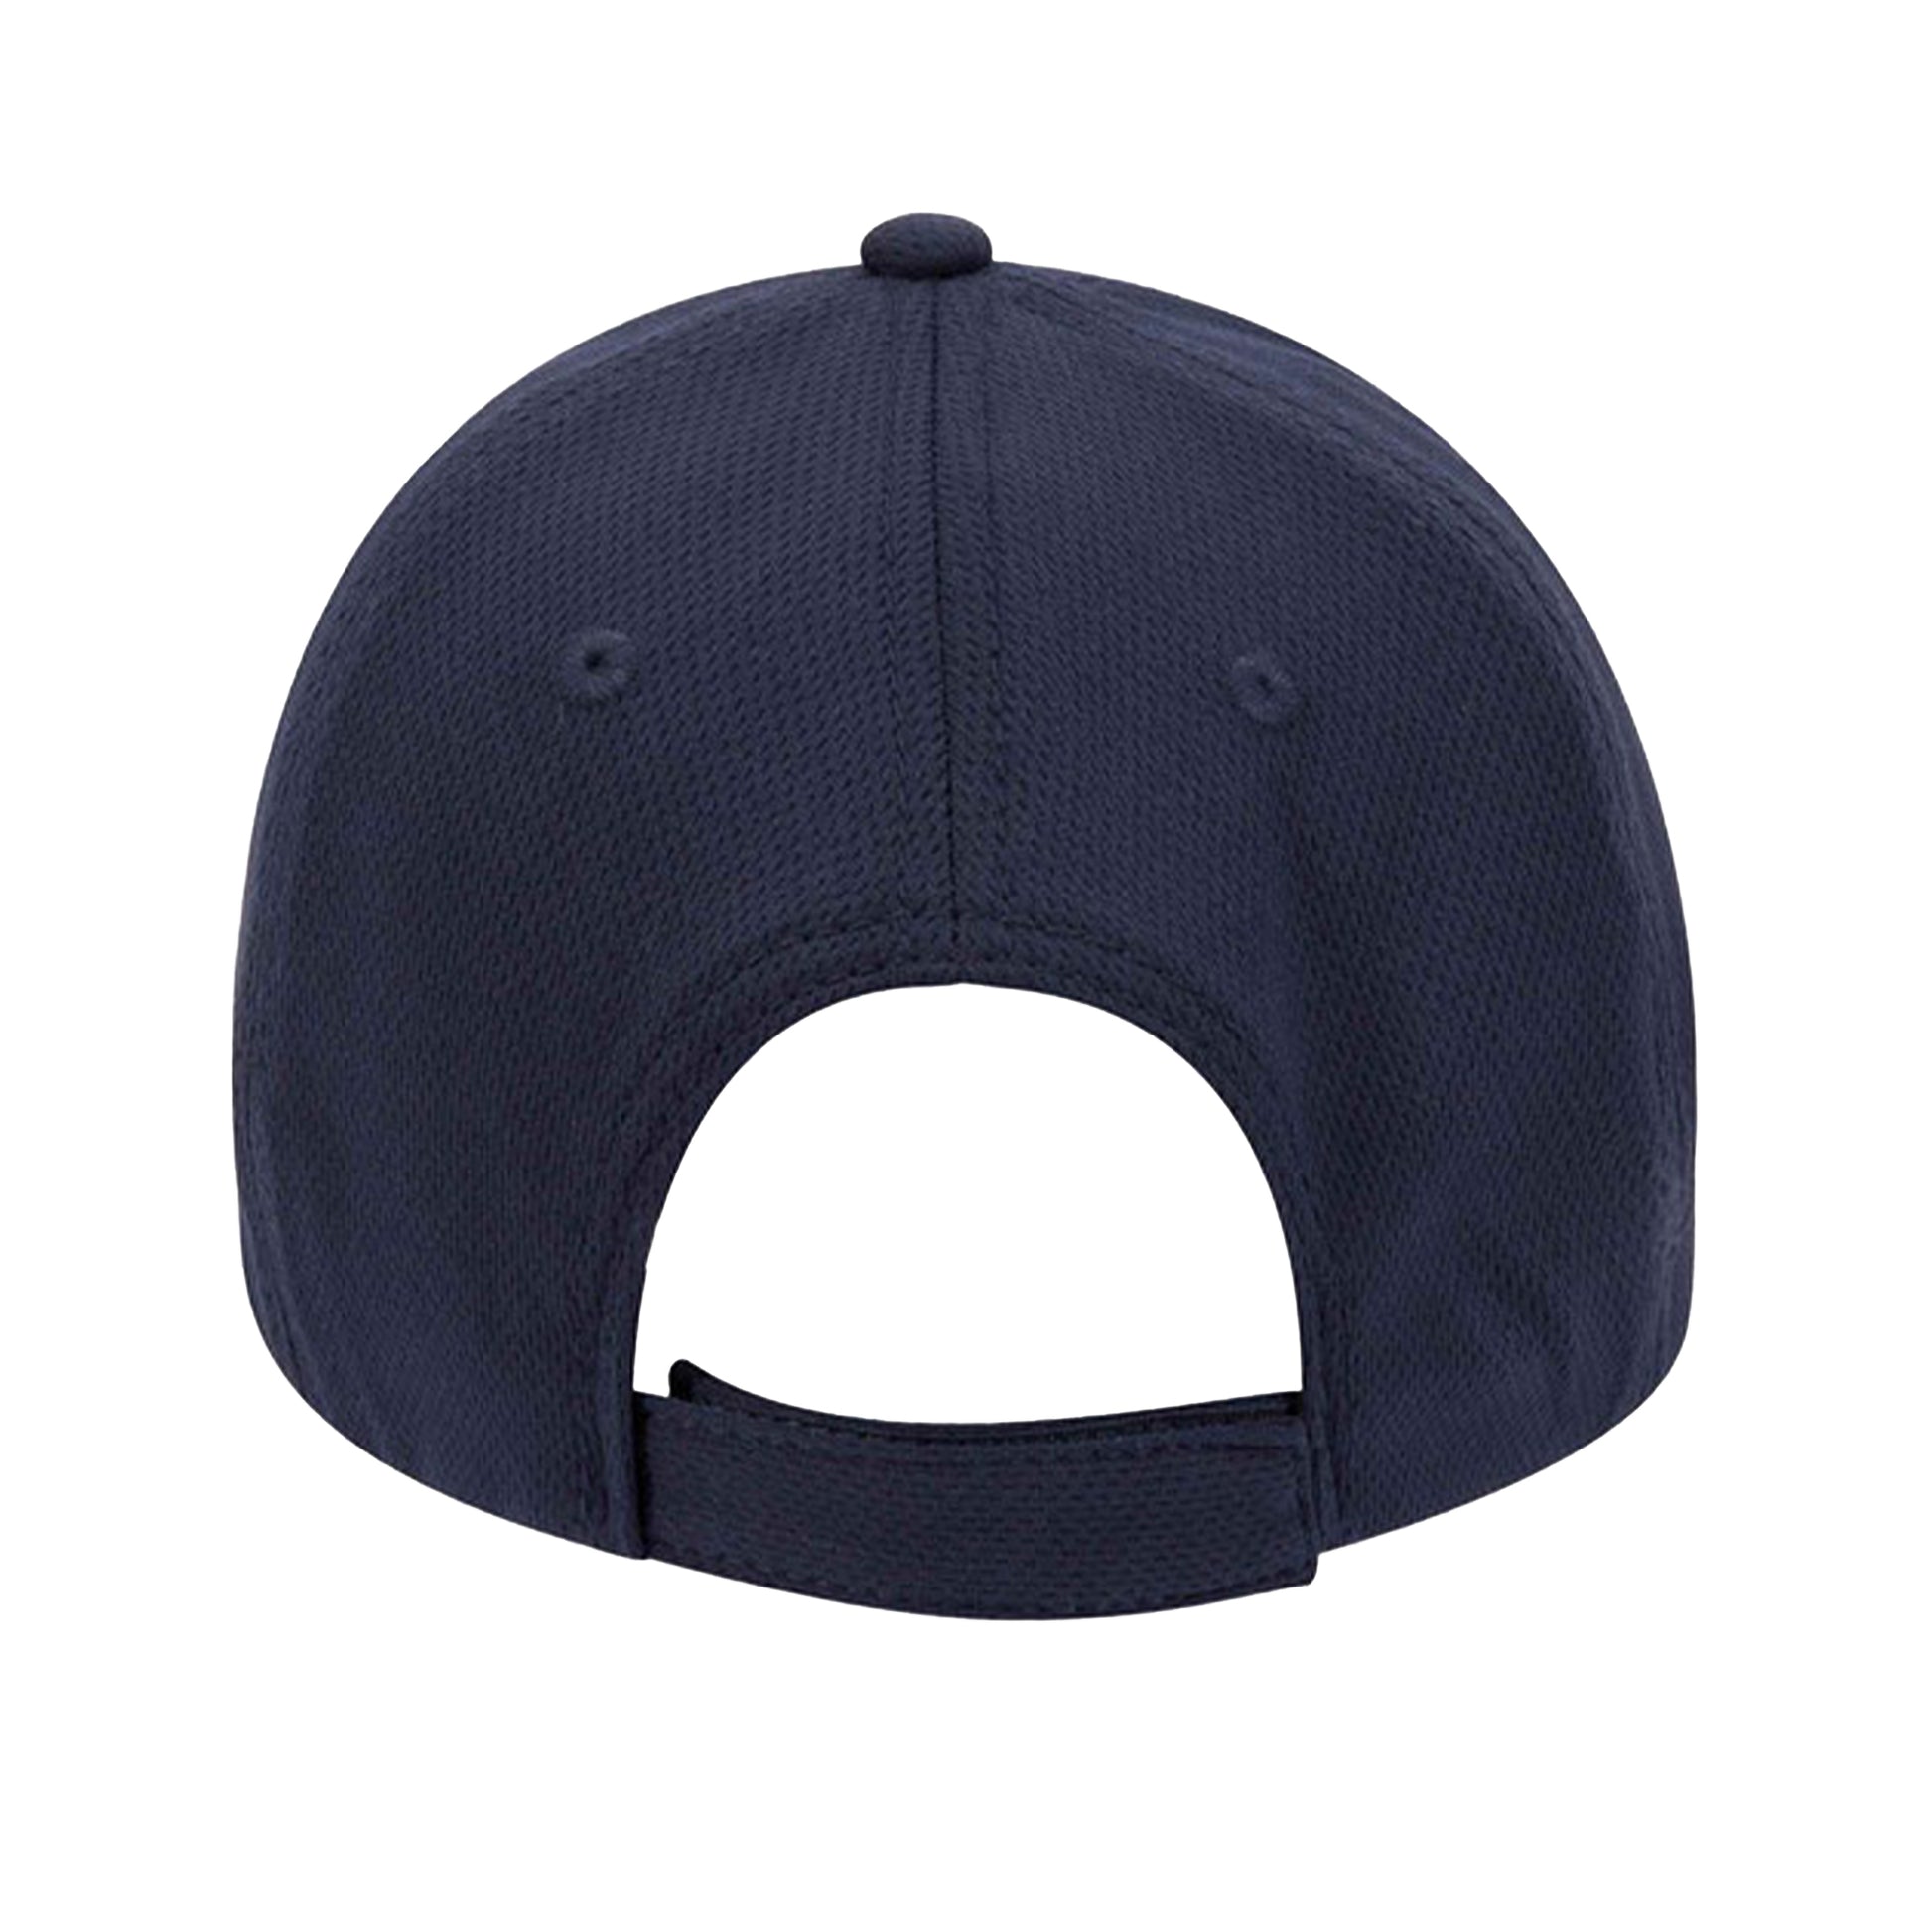 CP Parenteau 6 panel pickleball athletic performance hat in navy blue back view